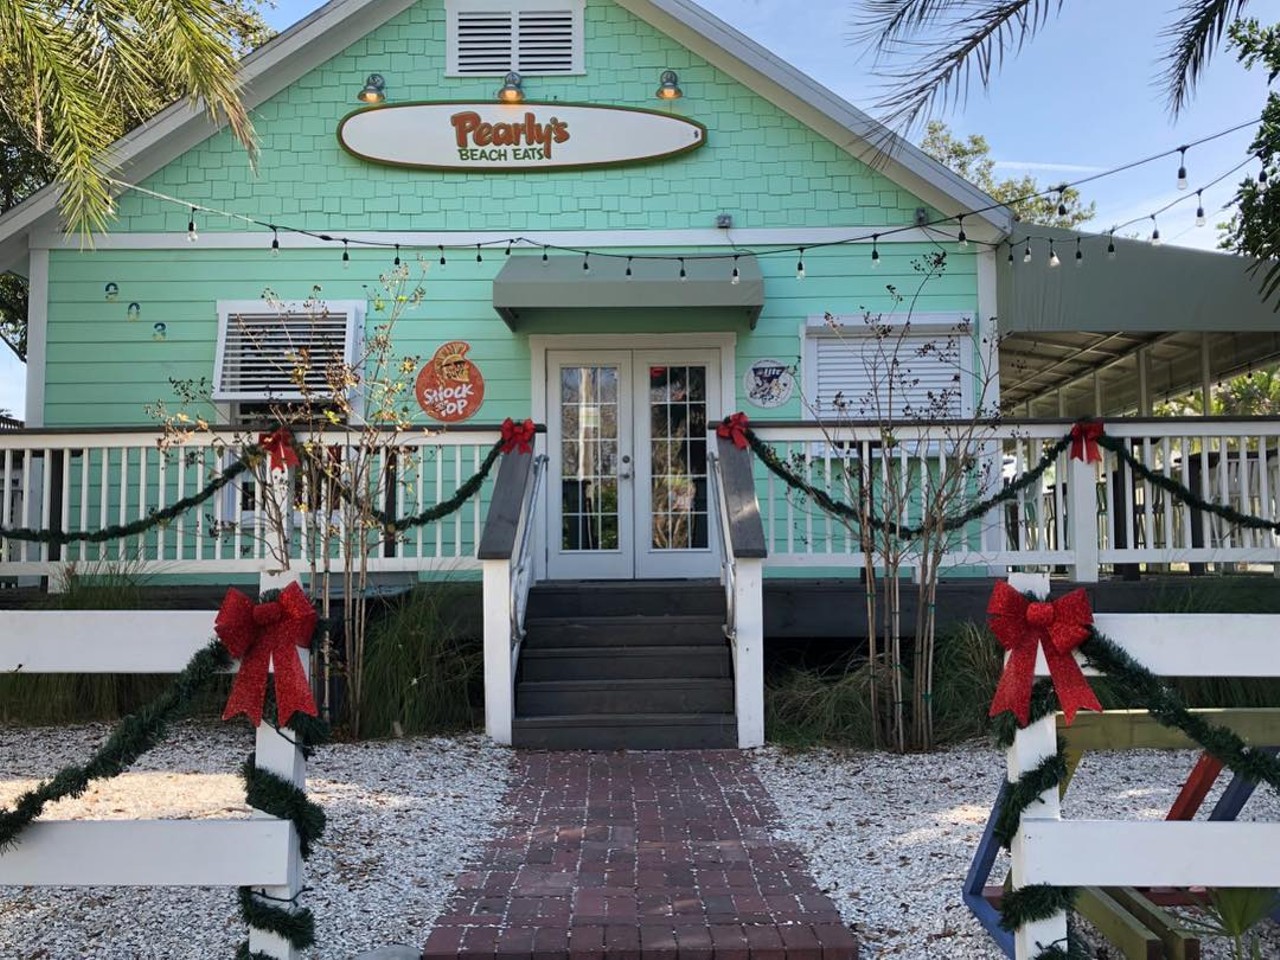  Pearly&#146;s Beach Eats  
2676 Bayshore Blvd H, Dunedin, FL 34698, (727) 286-7637  
Pearly&#146;s is an open and airy beach-themed casual restaurant, as if you couldn&#146;t tell by the tiki decor on the wall and the surfboard-inspired benches. Snag the $3 tacos and $3 beer they offer daily from 3pm-6pm which is a local favorite. 
Photo via Pearly&#146;s Beach Eats/Facebook